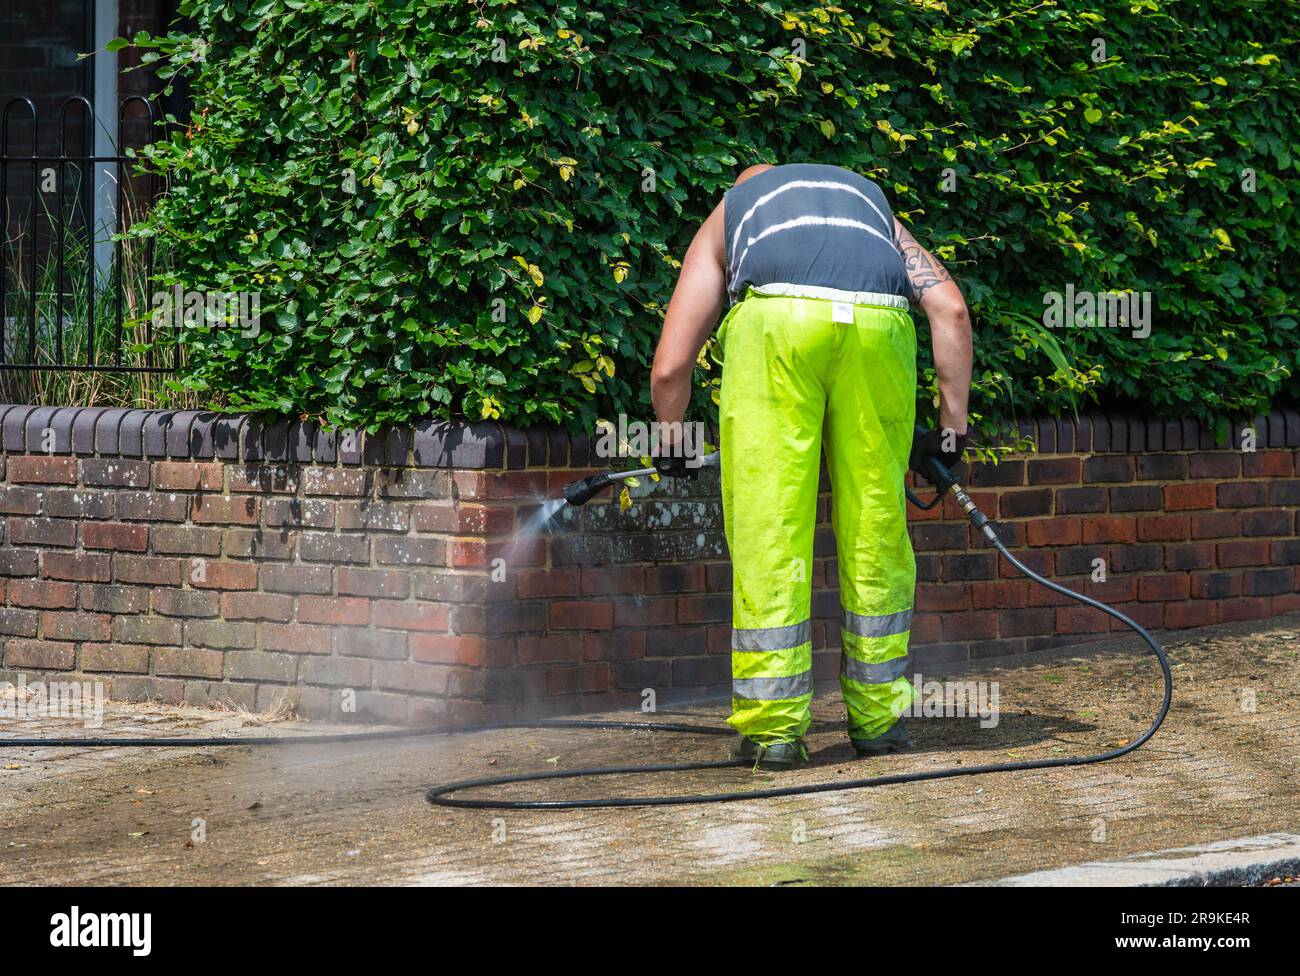 Man pressure washing a wall outside in Summer, with a hose and pressure washer, UK. Stock Photo